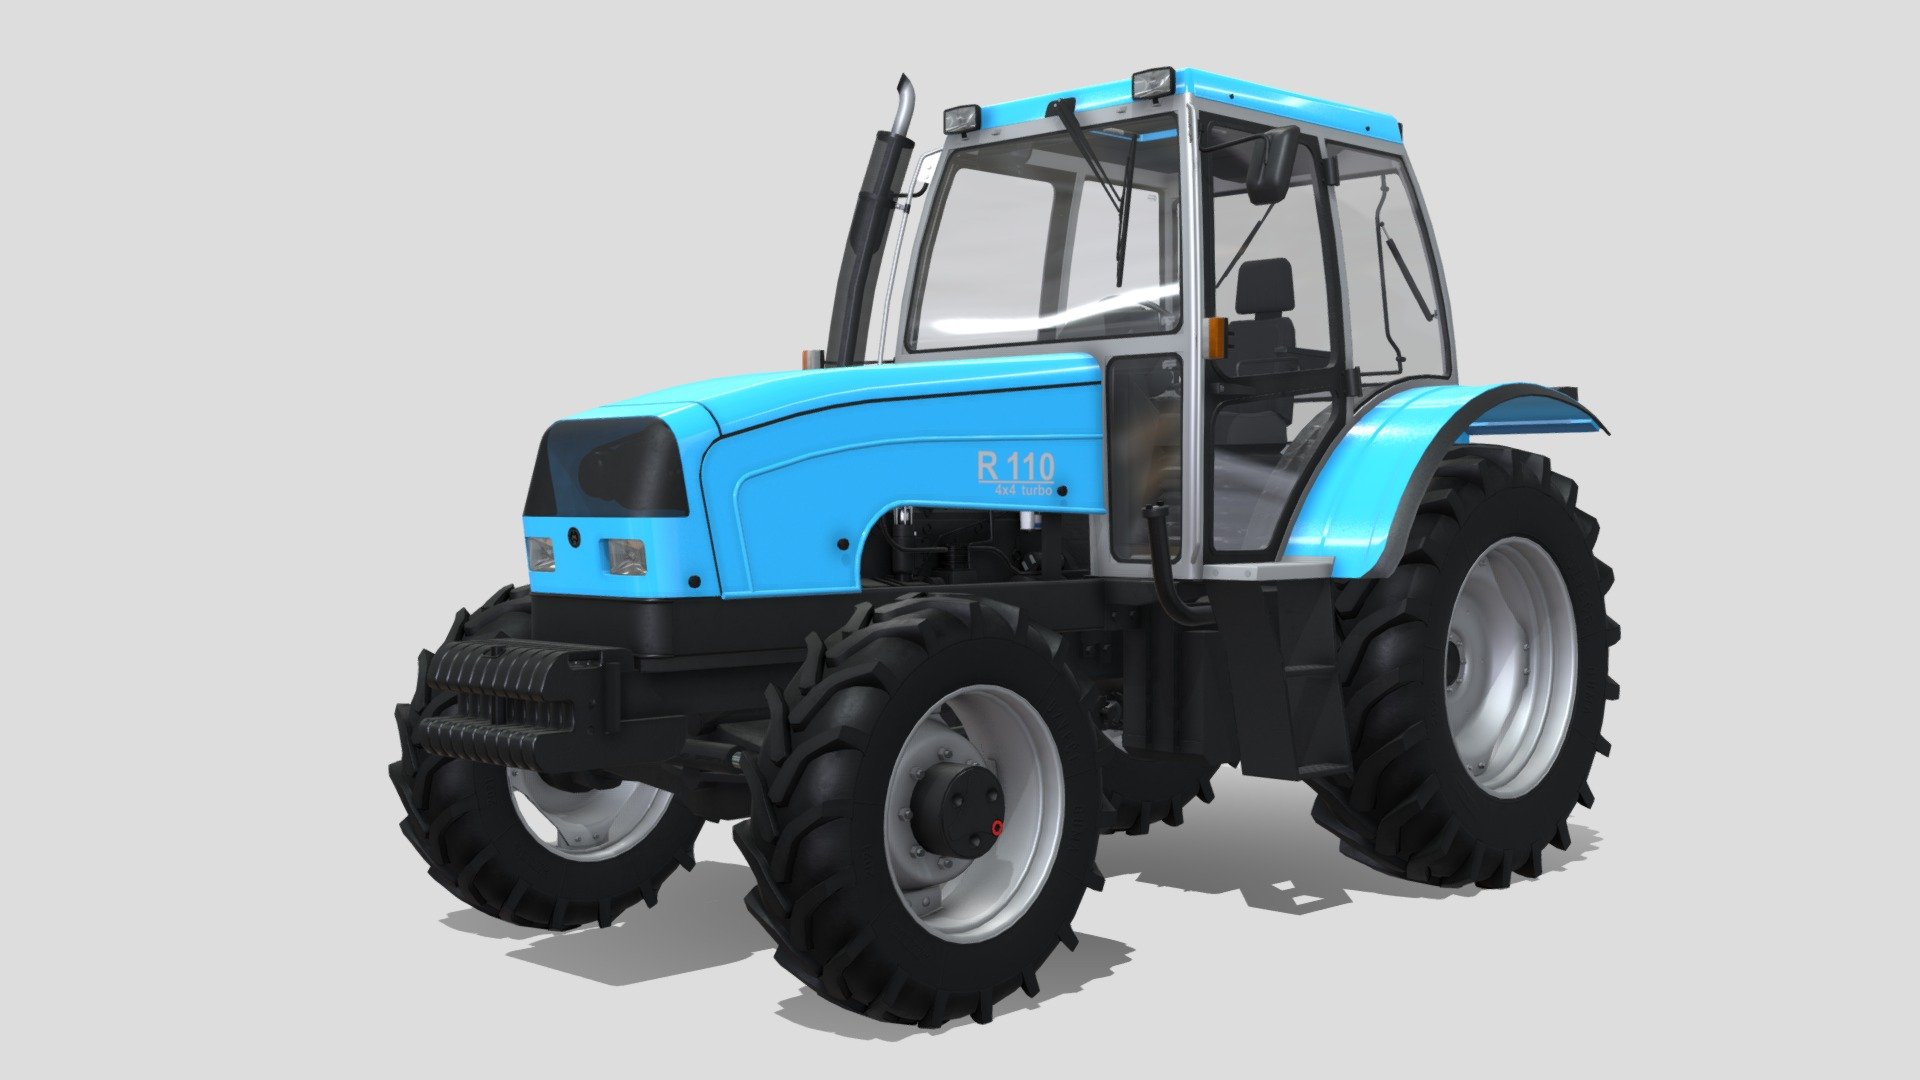 Updated to v2 on 24.6.2021. IMR Rakovica R 110 4x4 turbo, featuring a ZF T-series transmission and ZF AS front axle, Bosch electronic hydraulic system and an in-house developed digital dashboard. R 110 was first presented at the 2004 Novi Sad agricultural fair. IMR called it “A pinnacle of modern technology” 3d model